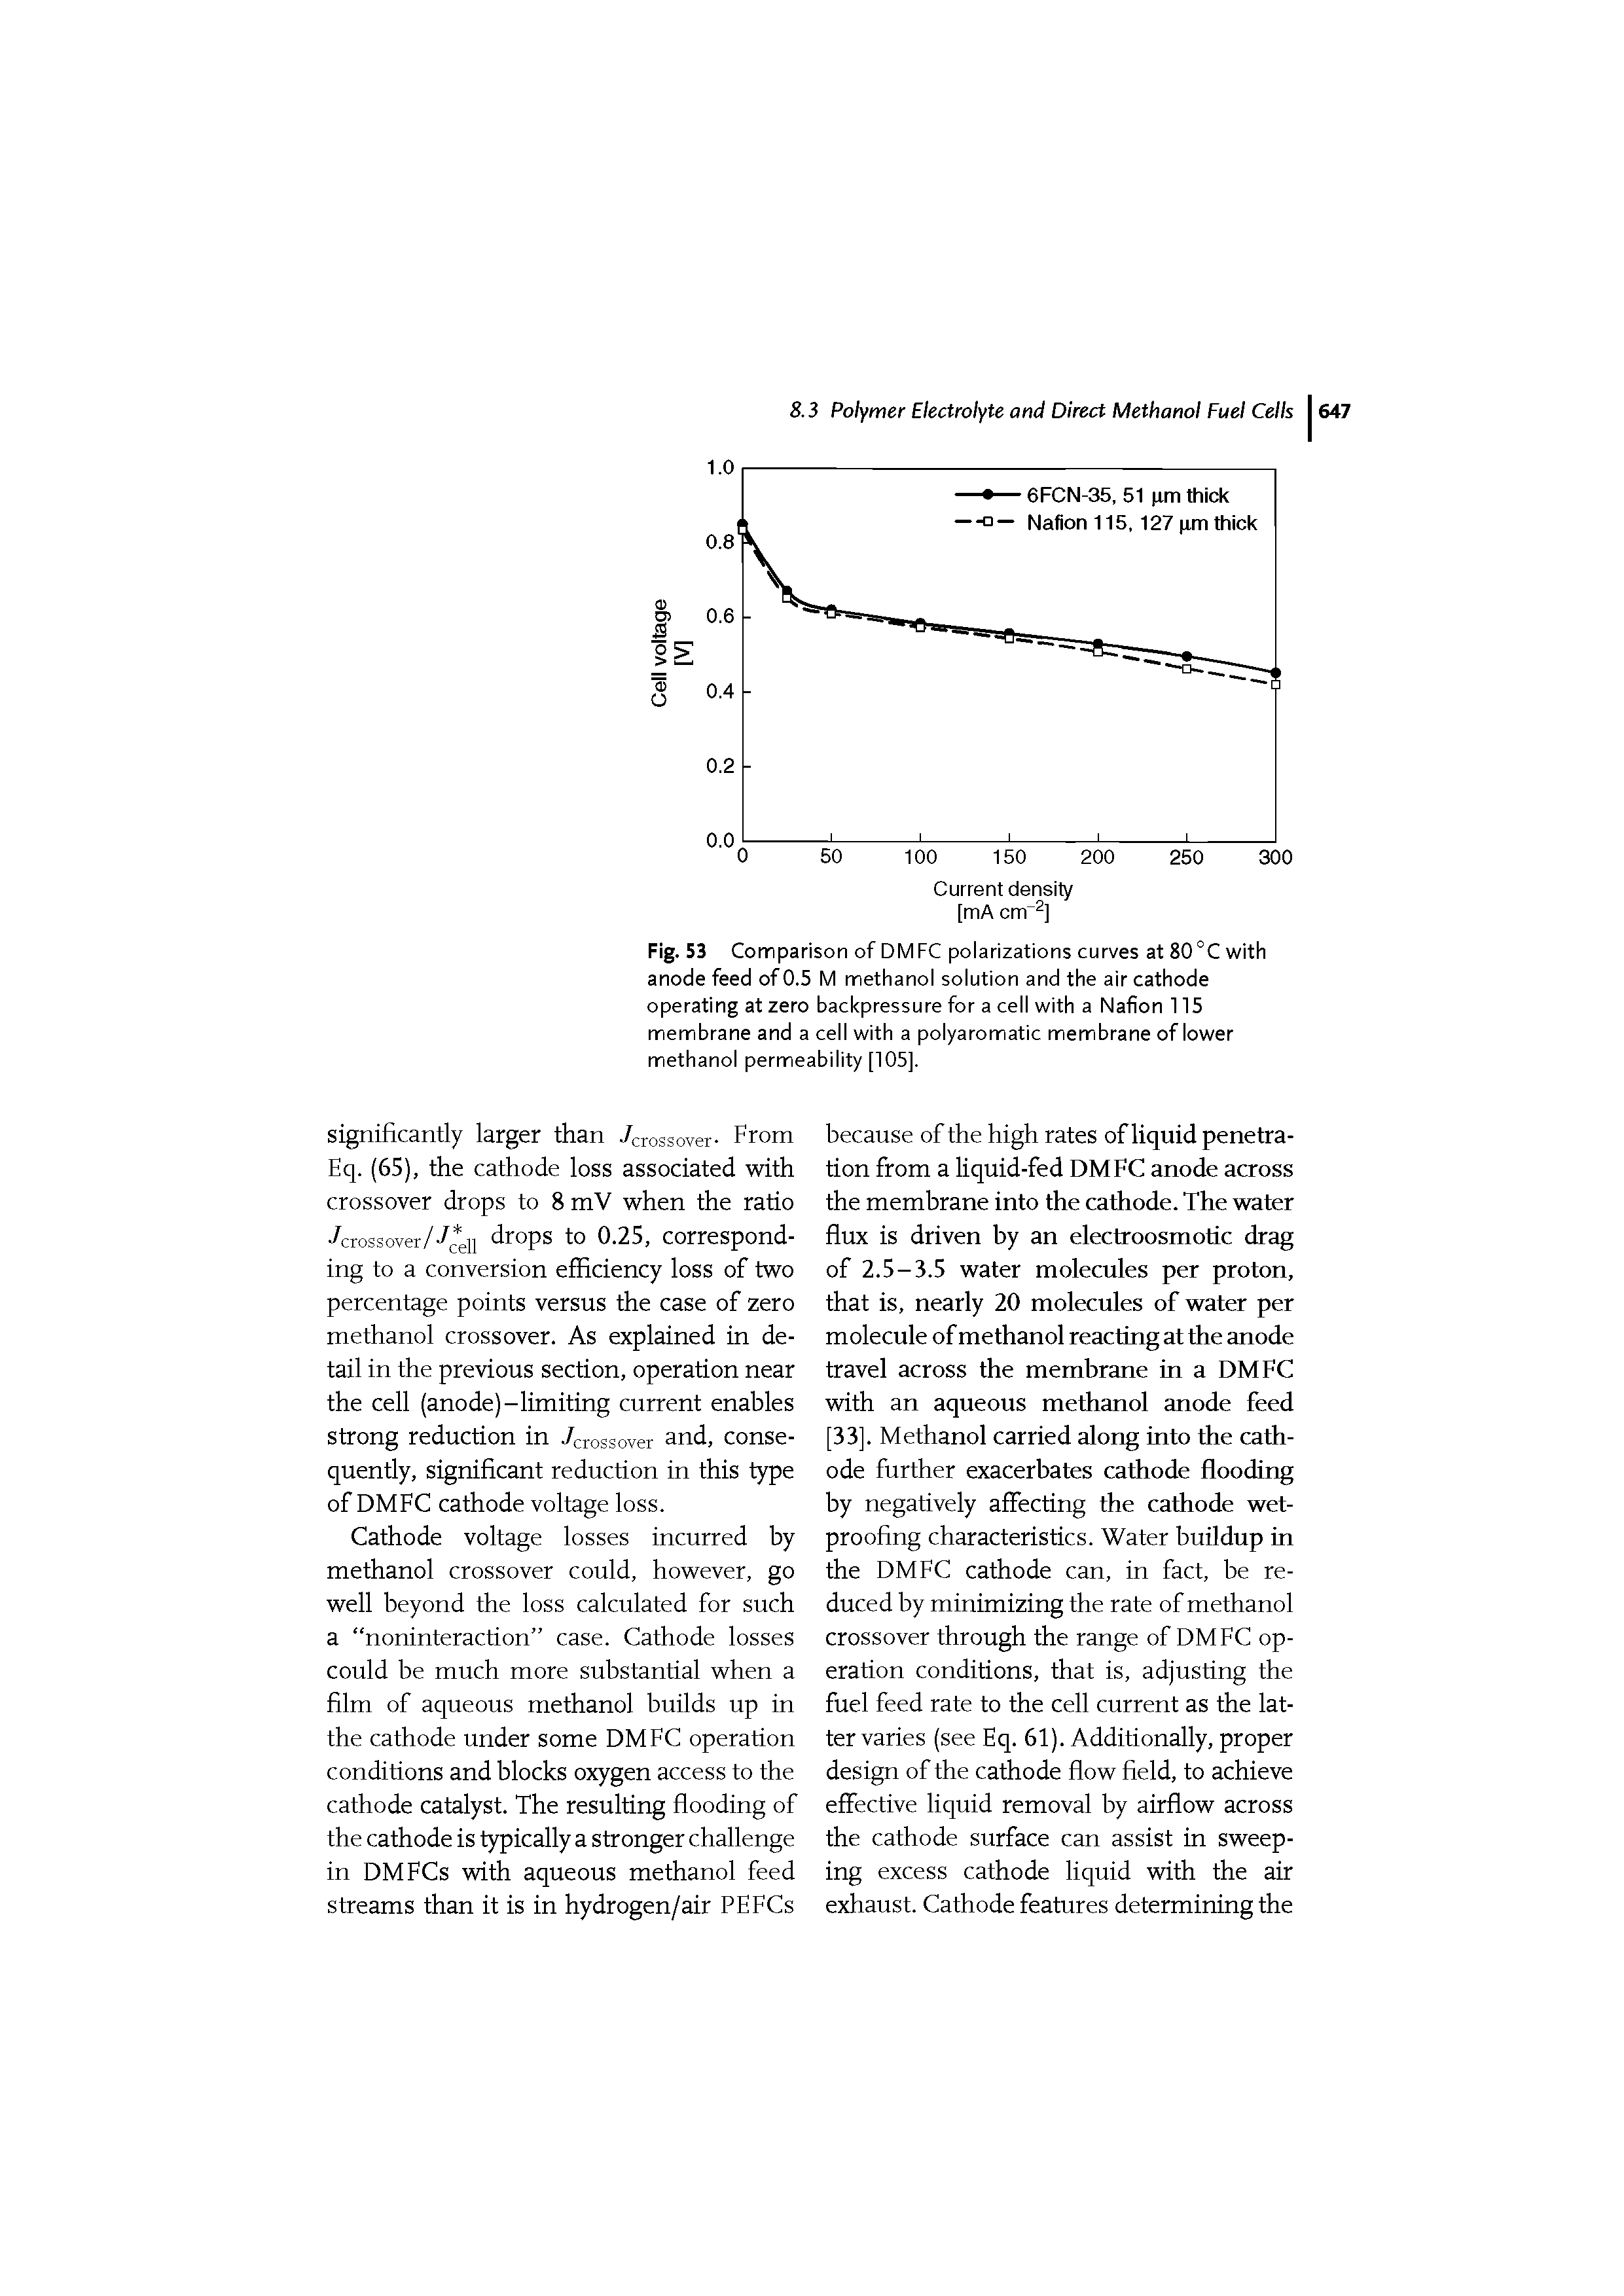 Fig. 53 Comparison of DMFC polarizations curves at 80 °C with anode feed of 0.5 M methanol solution and the air cathode operating at zero backpressure for a cell with a Nafion 115 membrane and a cell with a polyaromatic membrane of lower methanol permeability [105].